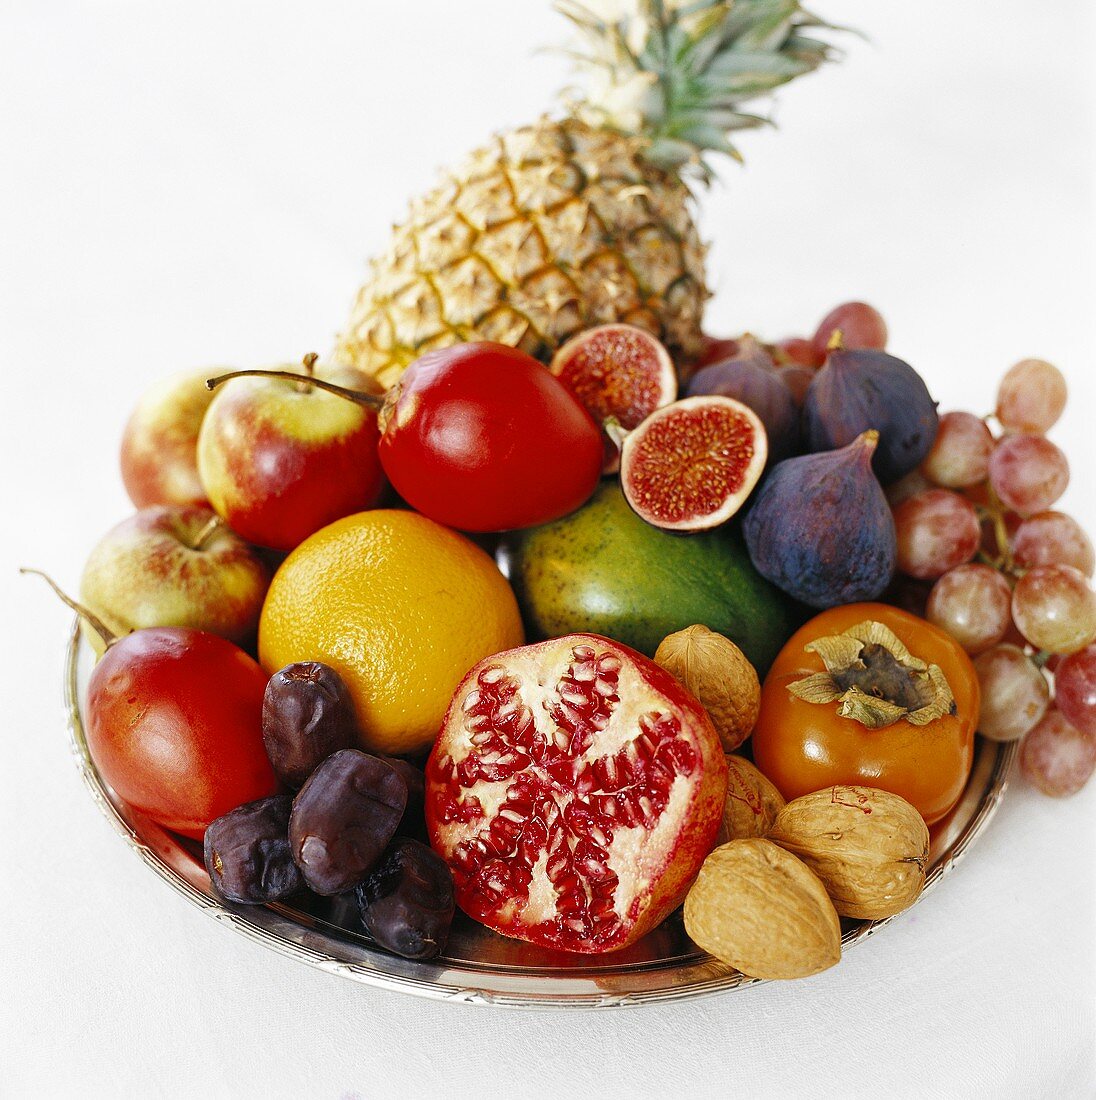 Plate of fruit with walnuts